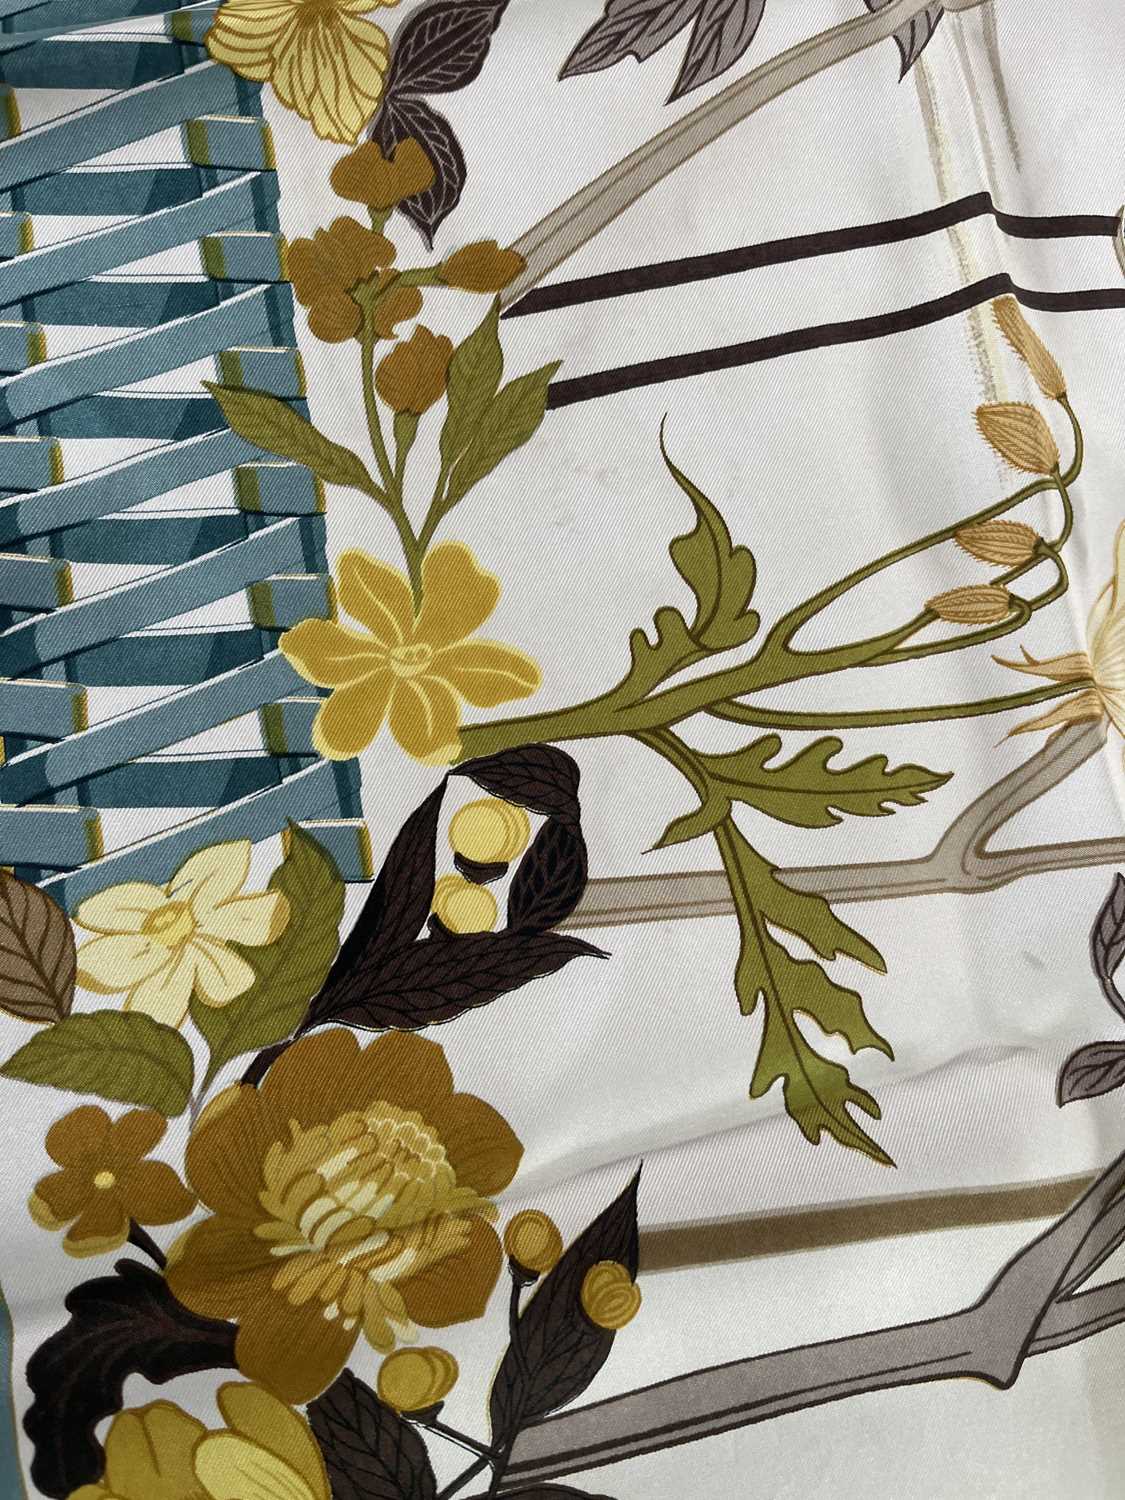 HERMES - A printed silk scarf 'Les Bolides'. - Image 6 of 7